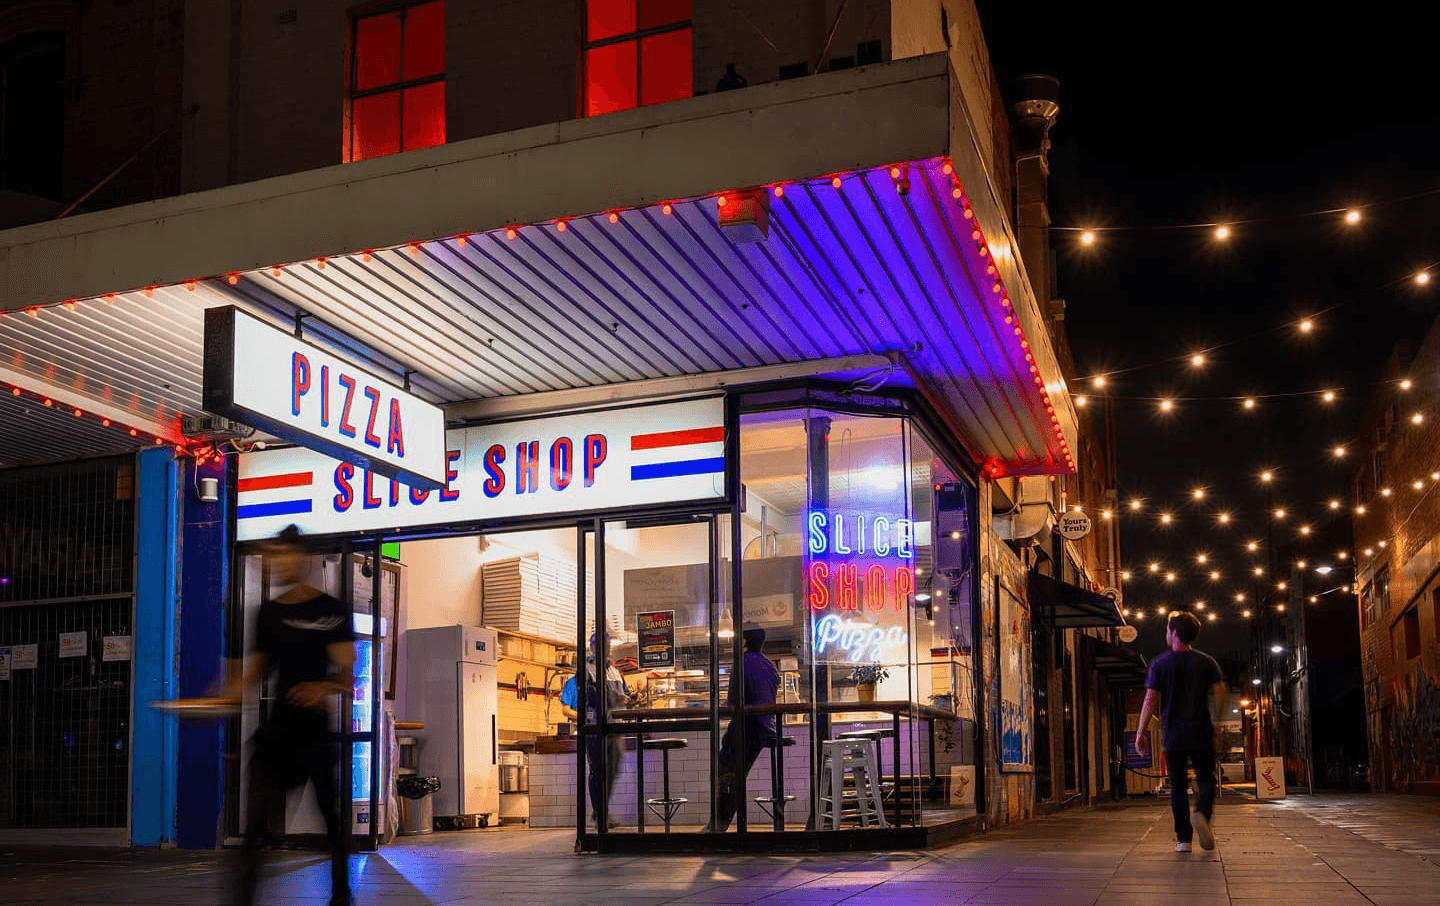 A neon-lit pizza spot called Slice Shop, who serve up some of Melbourne's best pizza.